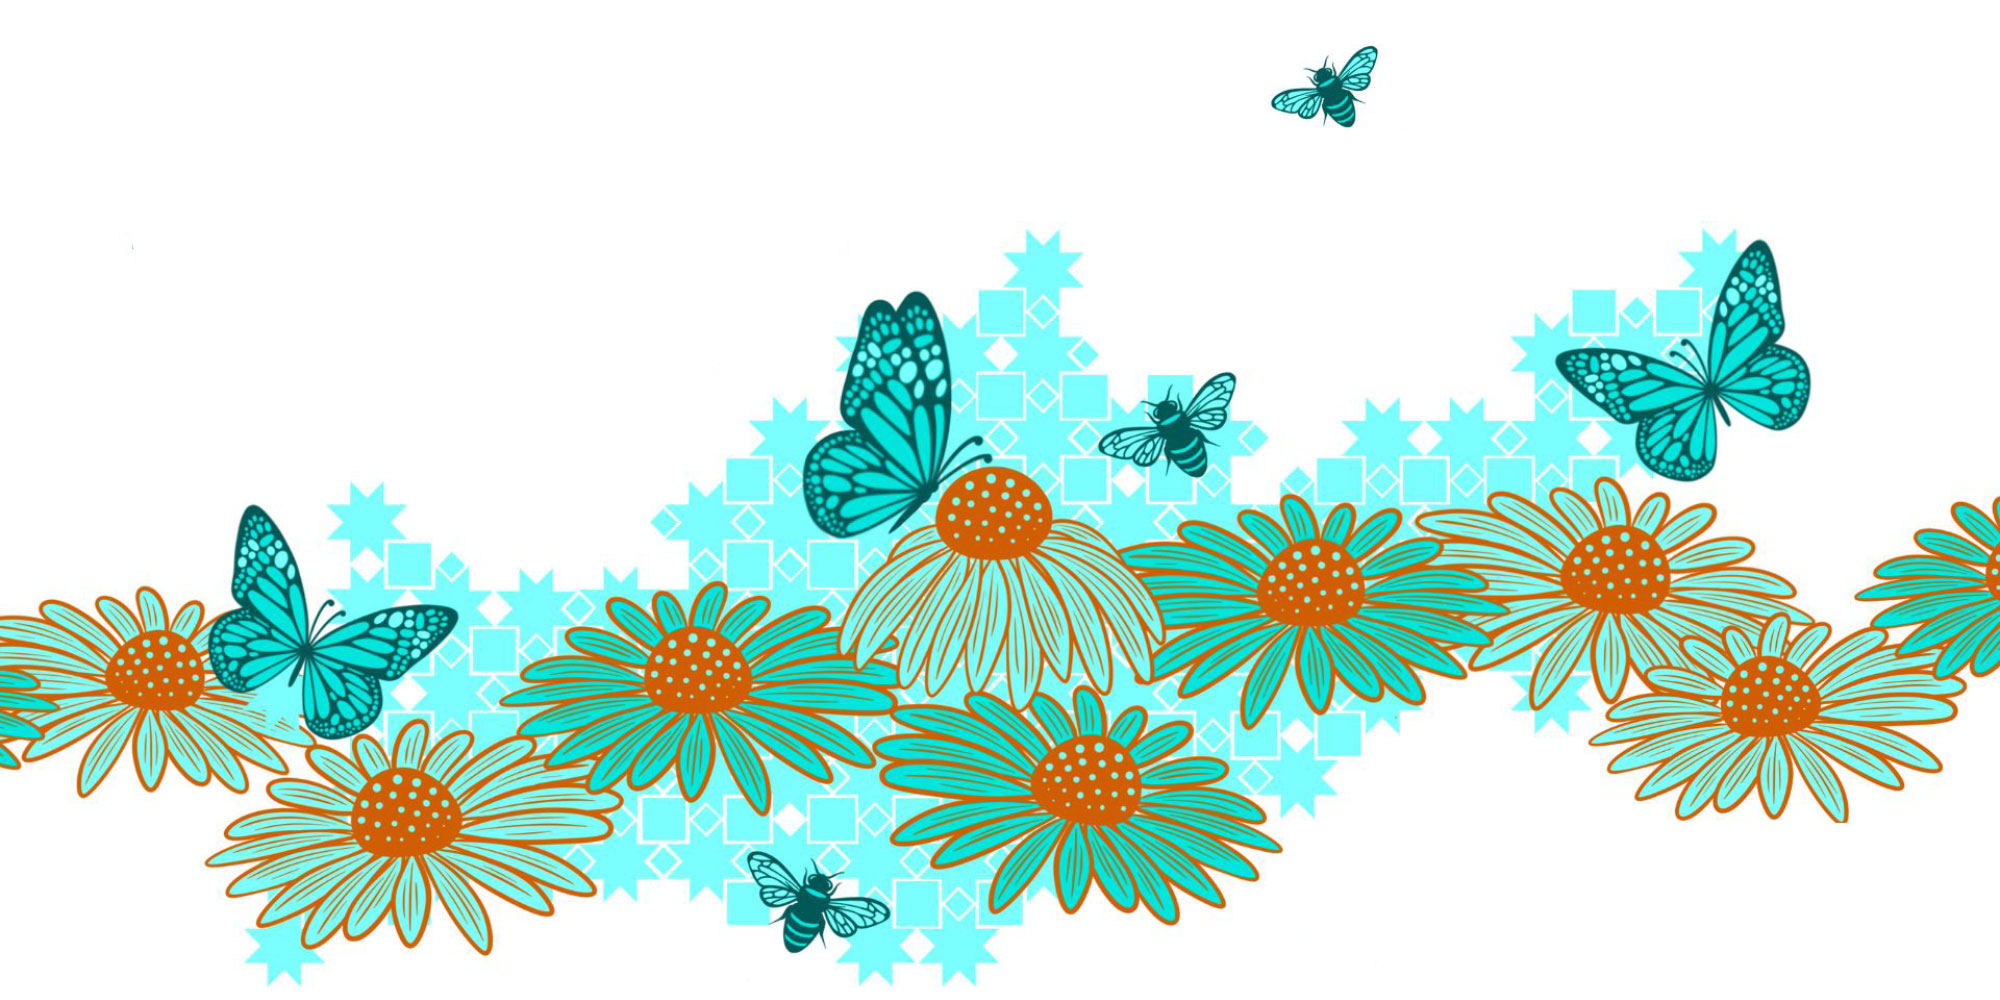 A background image of flowers and butterflies